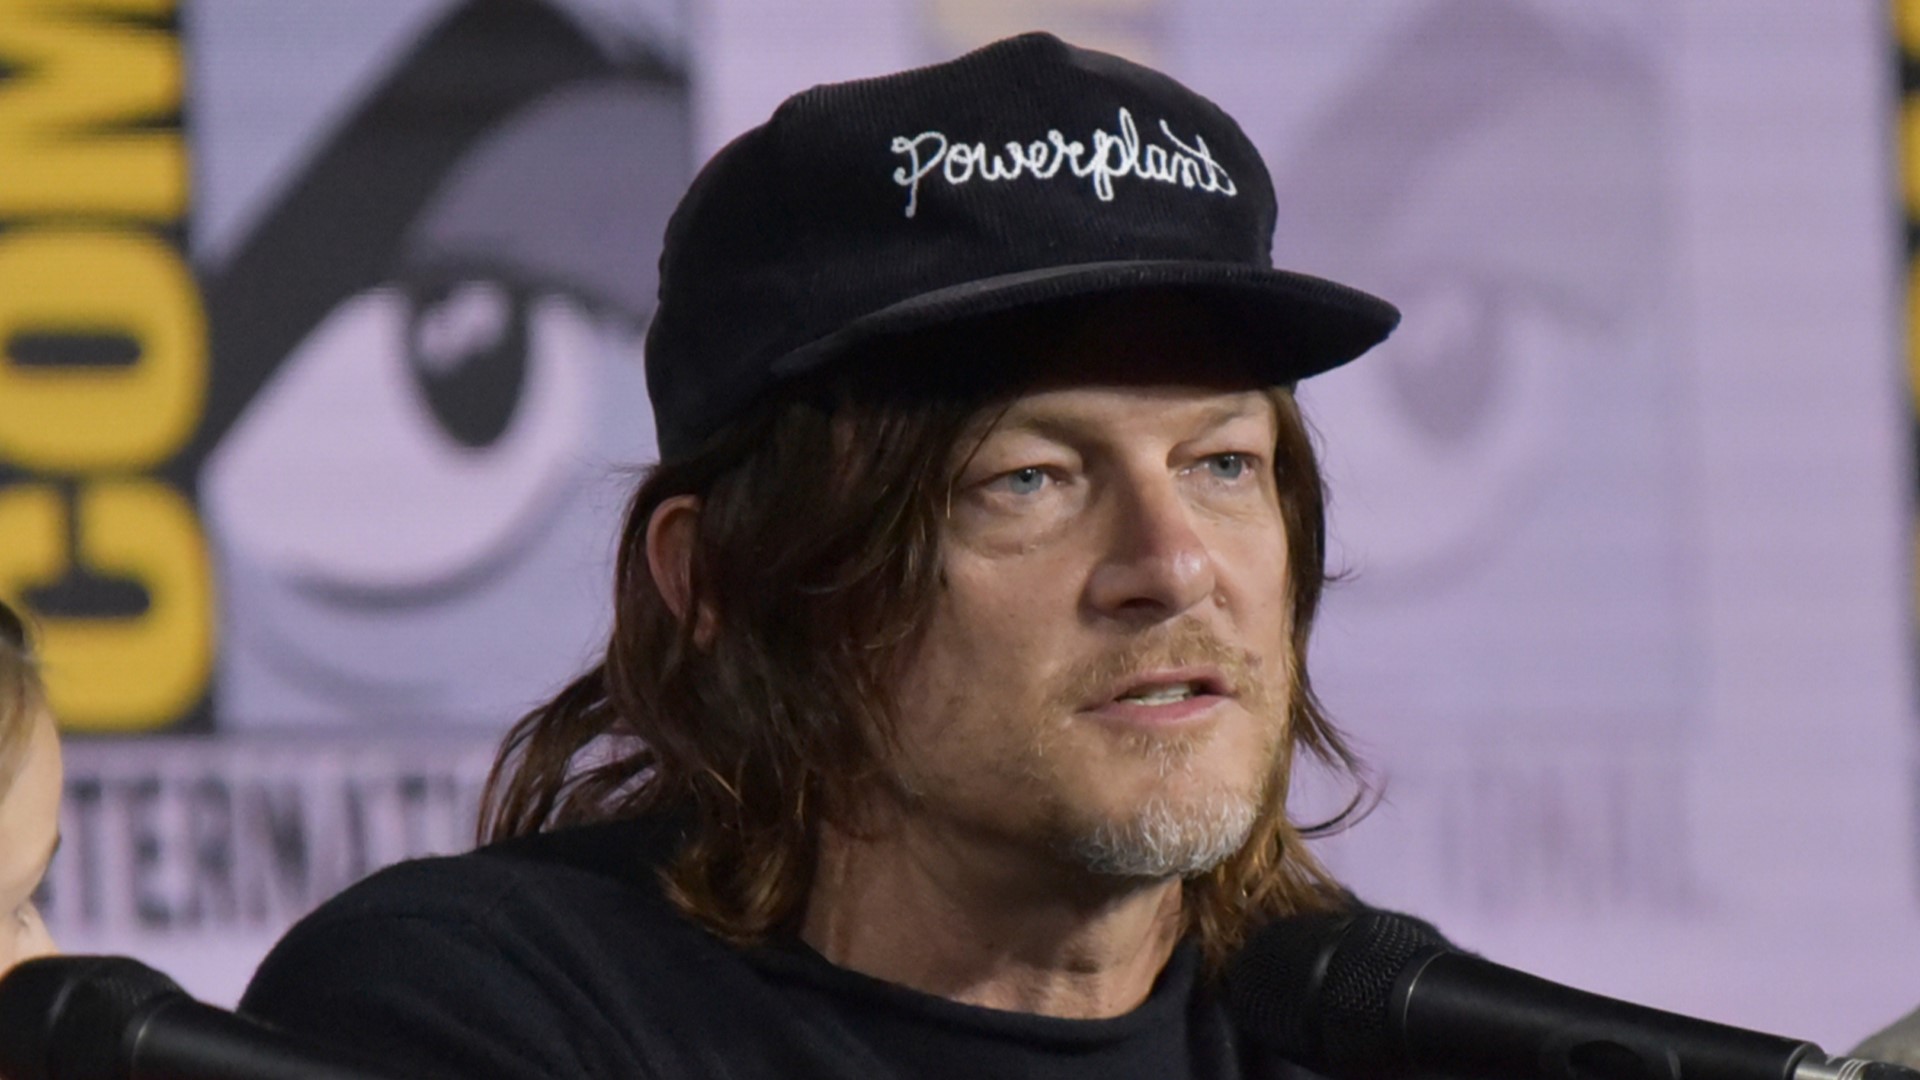 Norman Reedus is the owner of Nic and Normans, a restaurant he owns in “Walking Dead Country,” with the show’s executive producer.